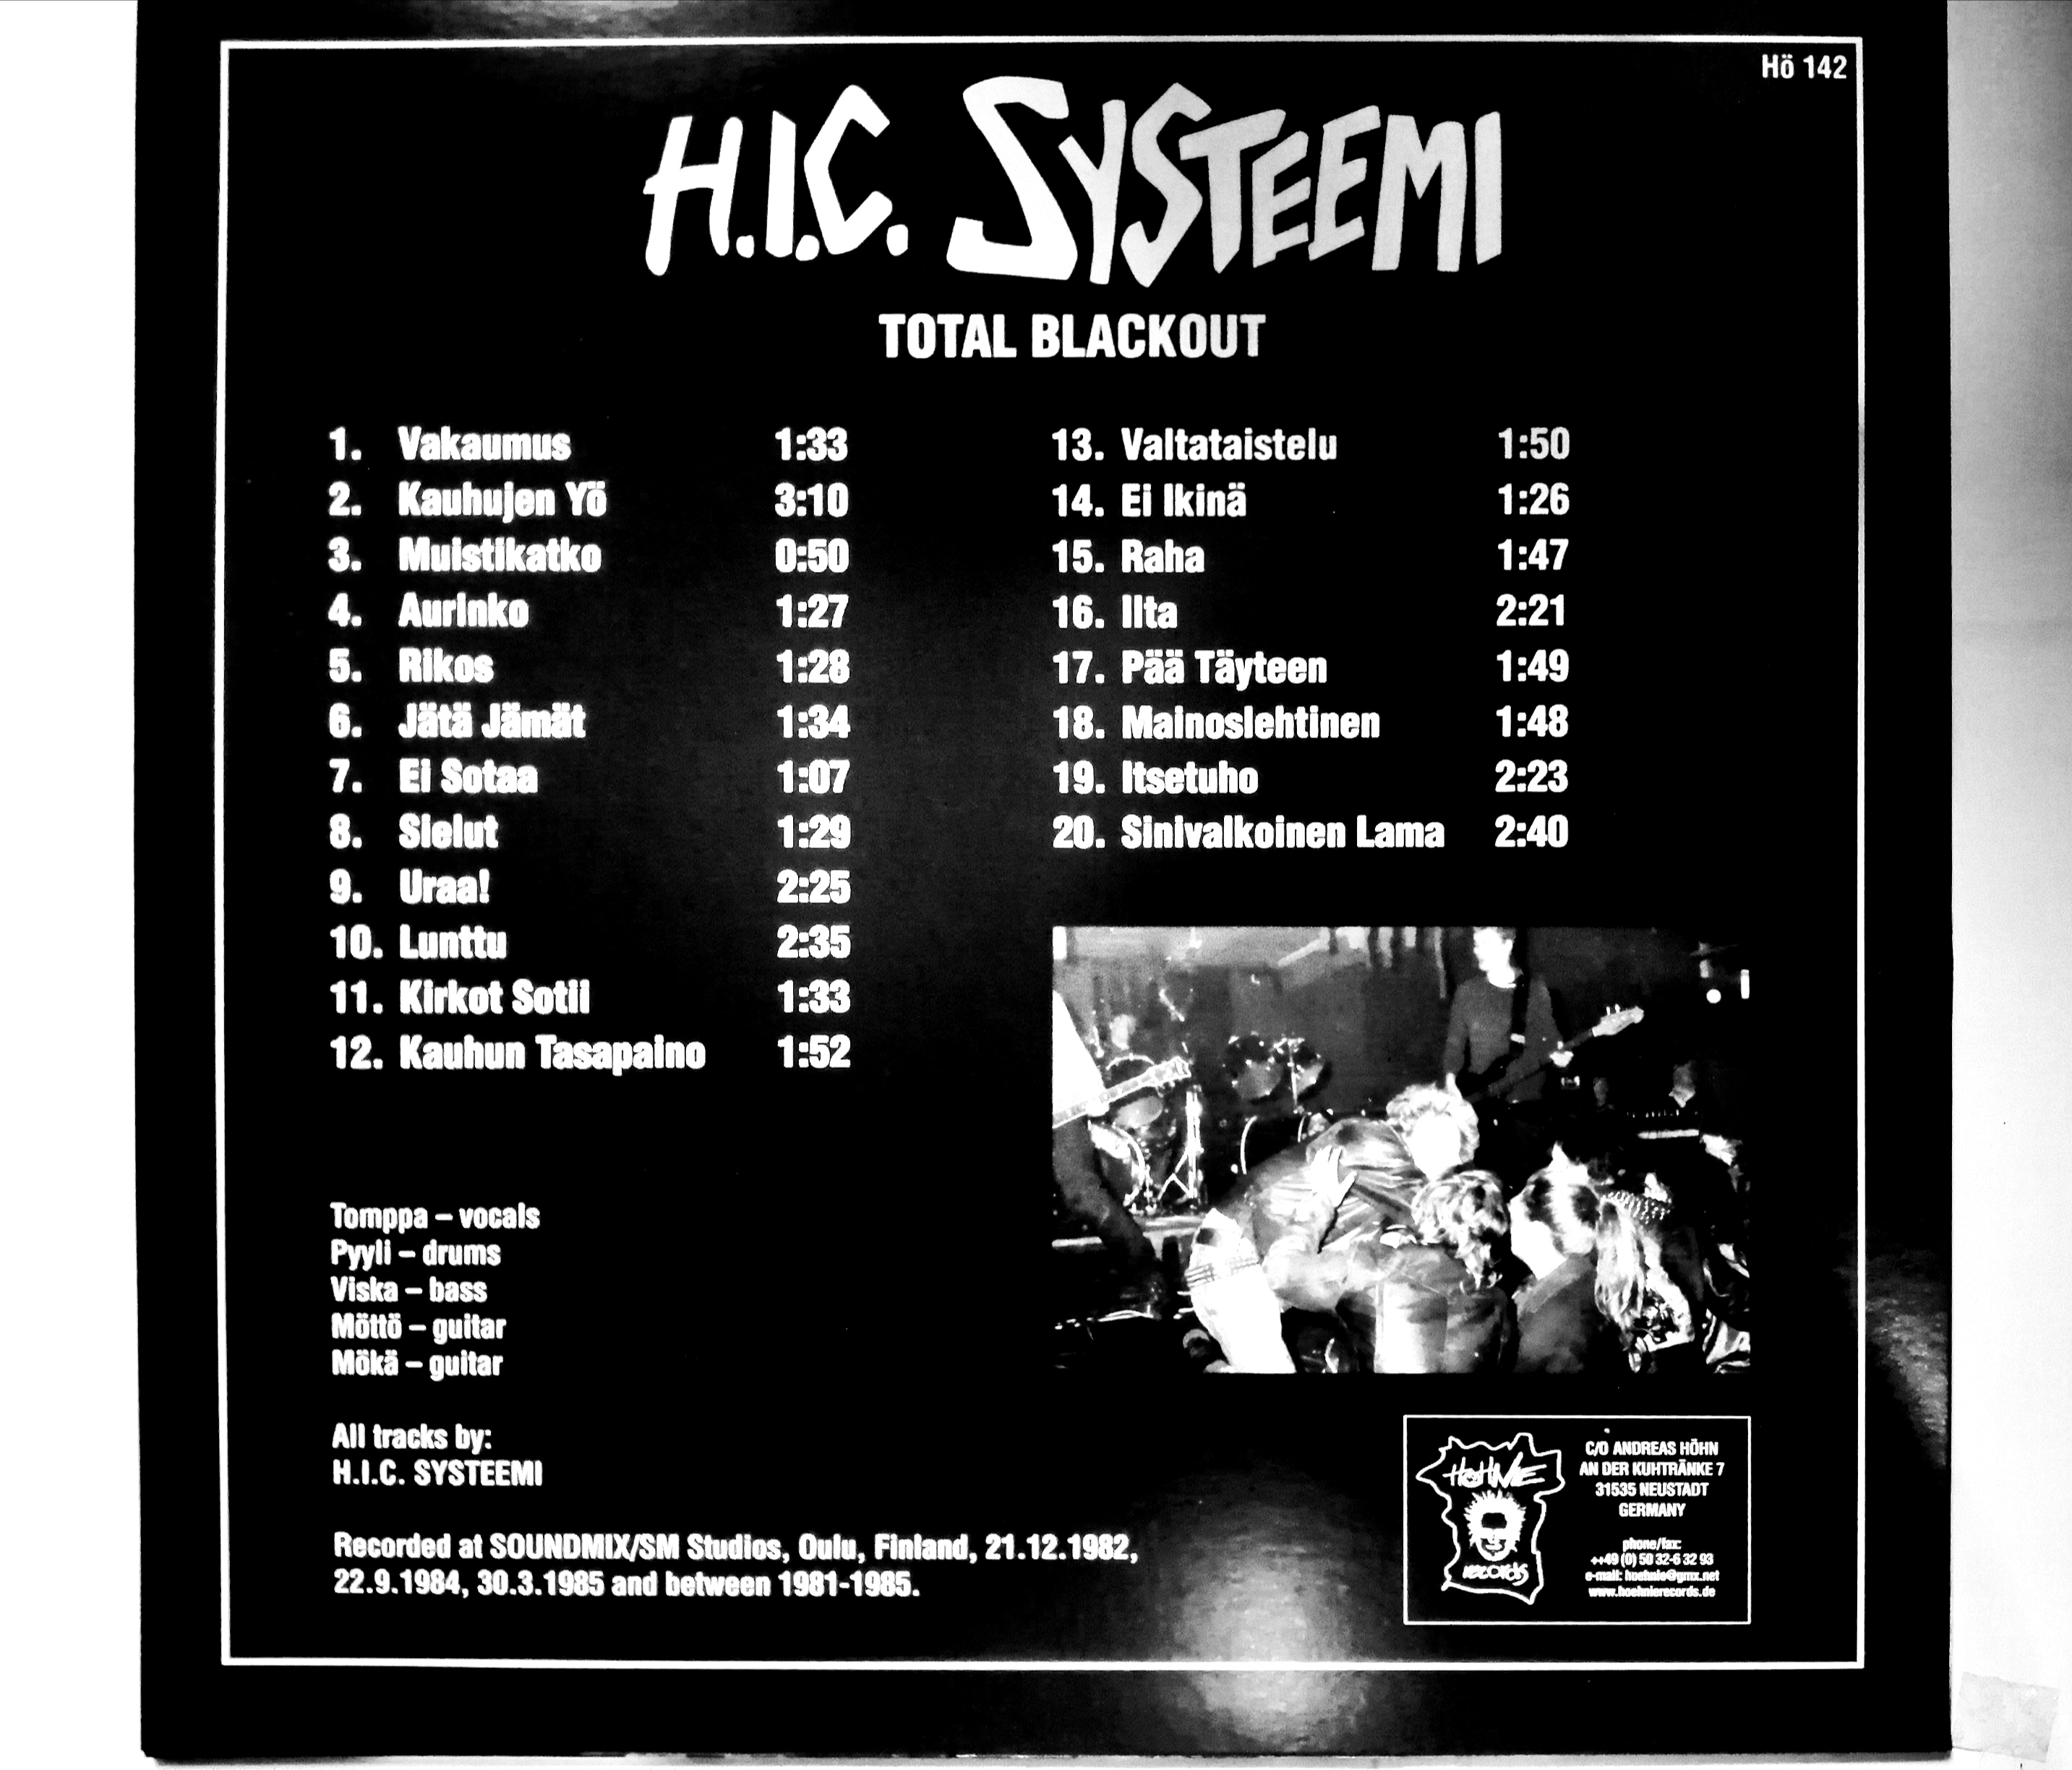 H.I.C. Systeemi - Total Blackout LP